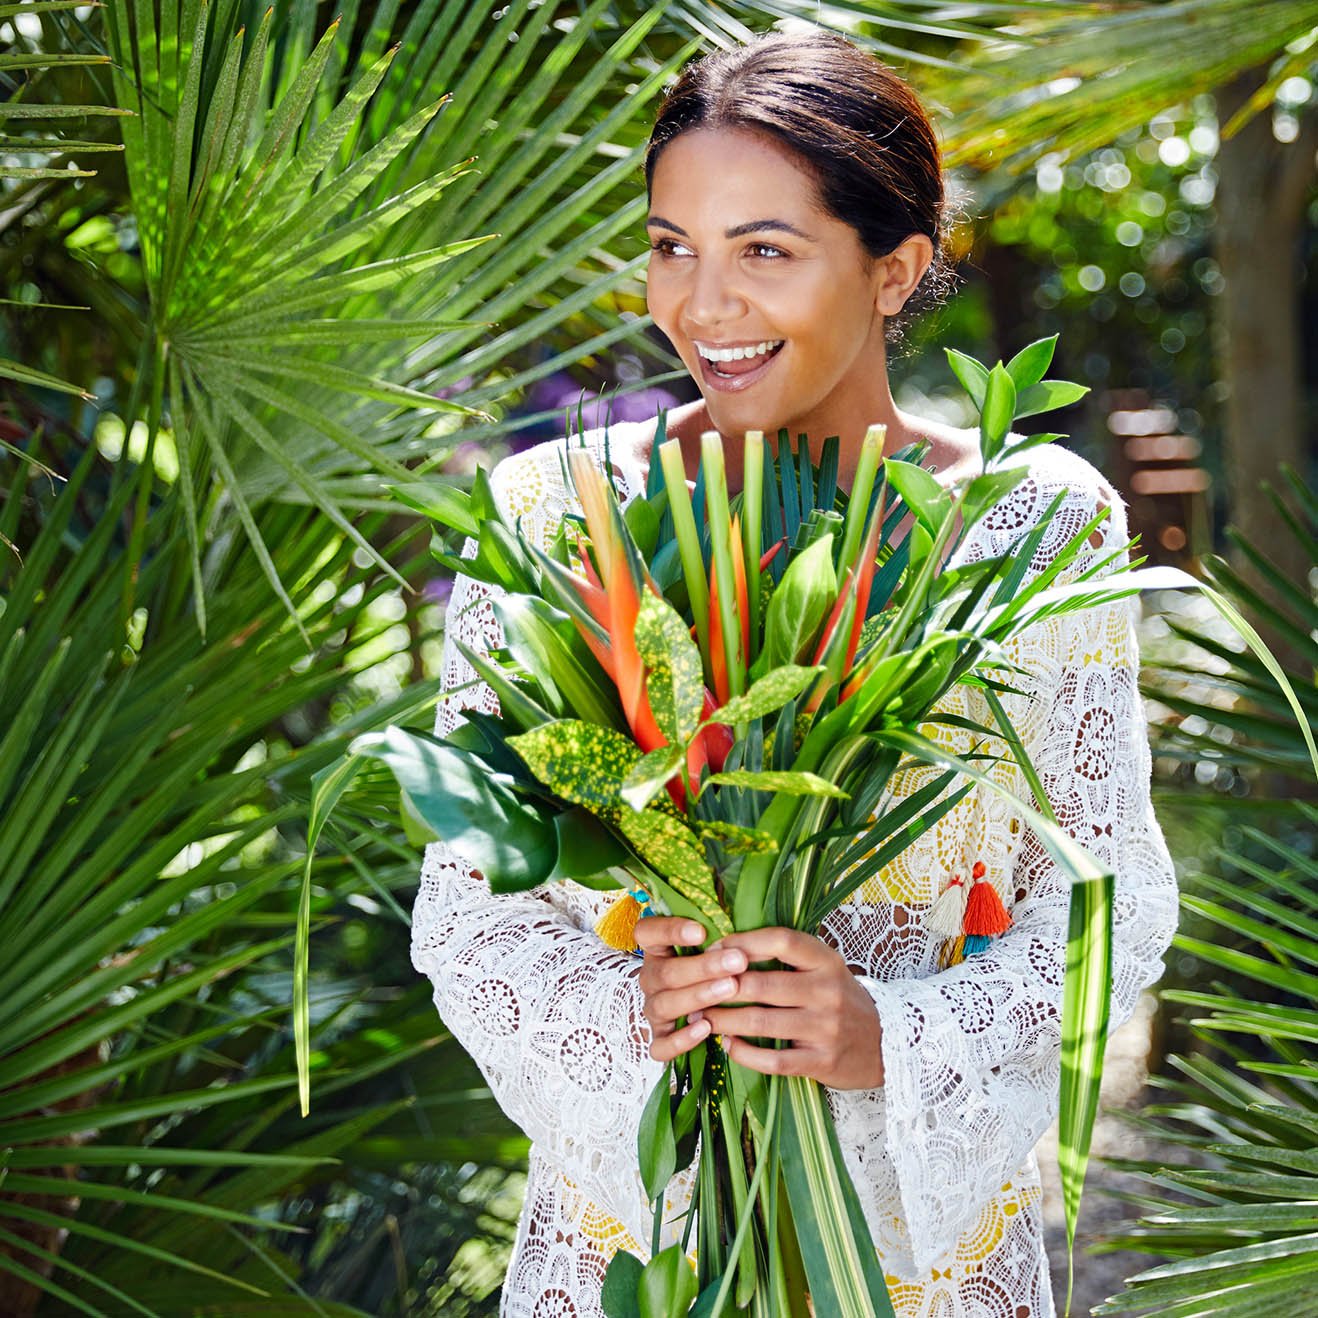 HOW TO TAKE YOUR OWN ADVICE – Tropic Skincare